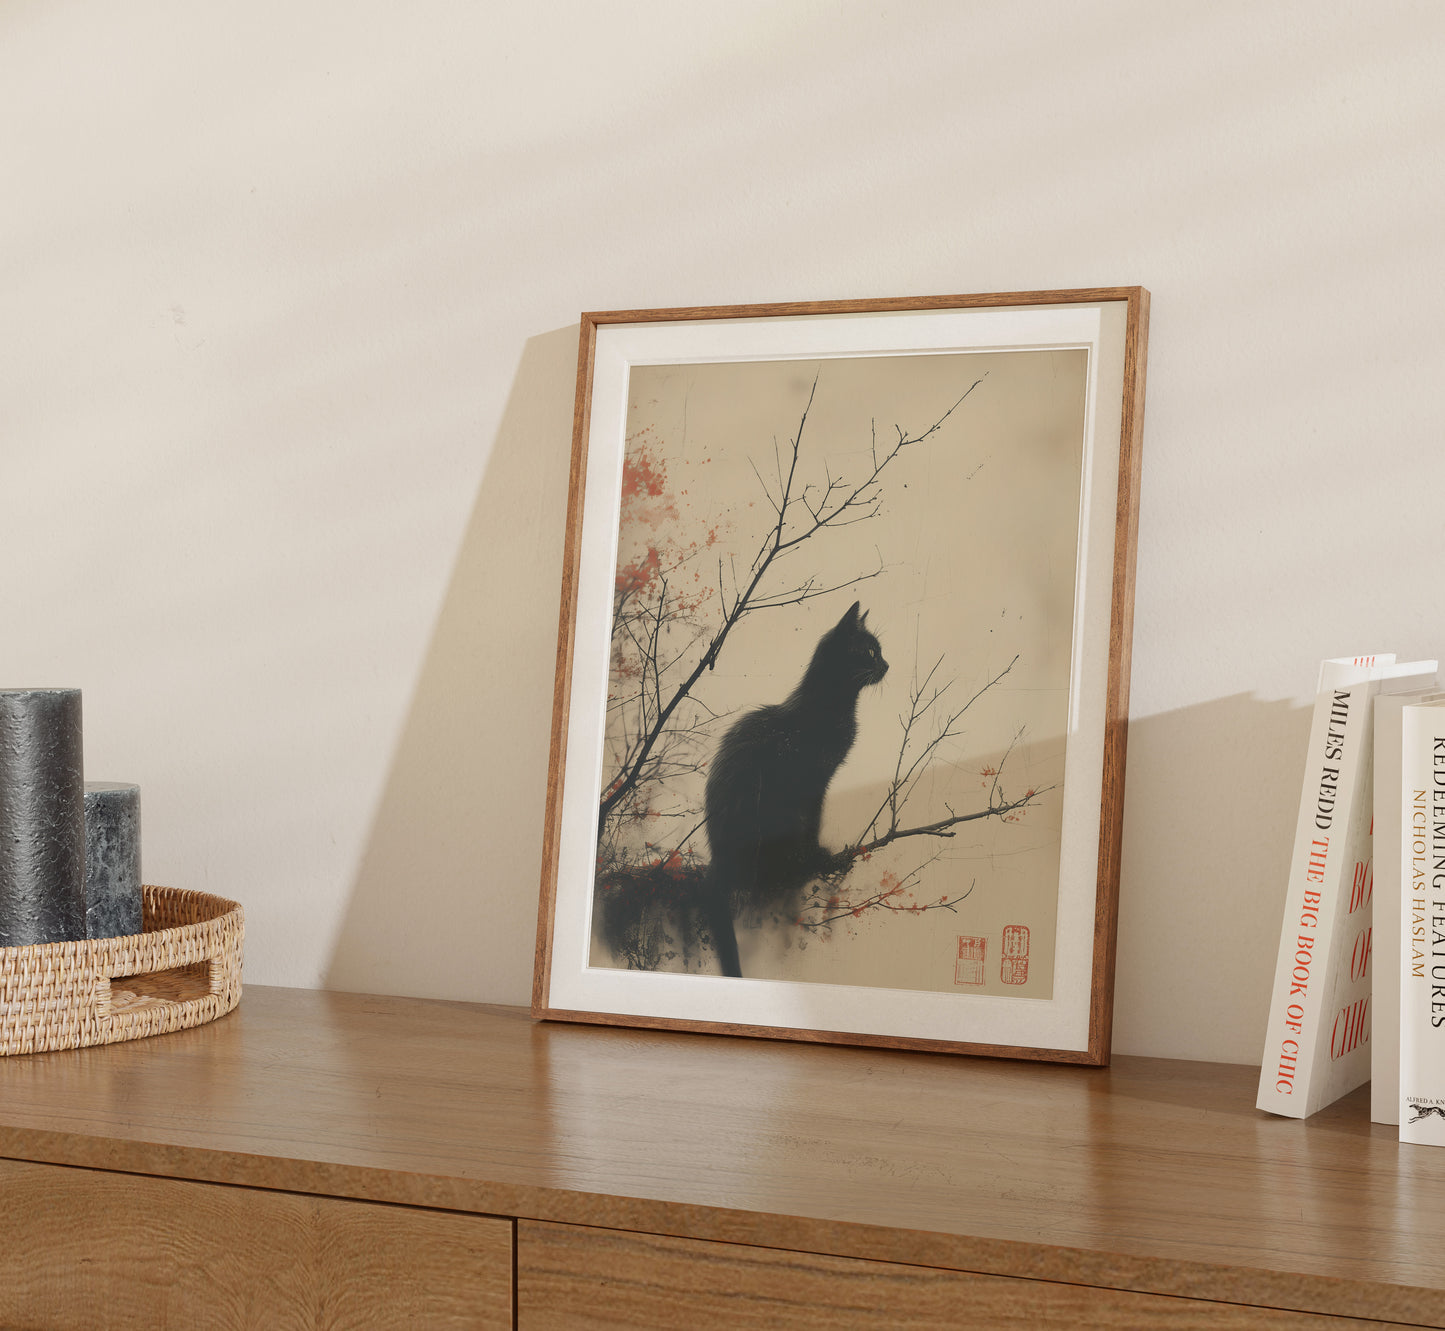 Framed artwork of a cat silhouette against a floral background on a shelf.